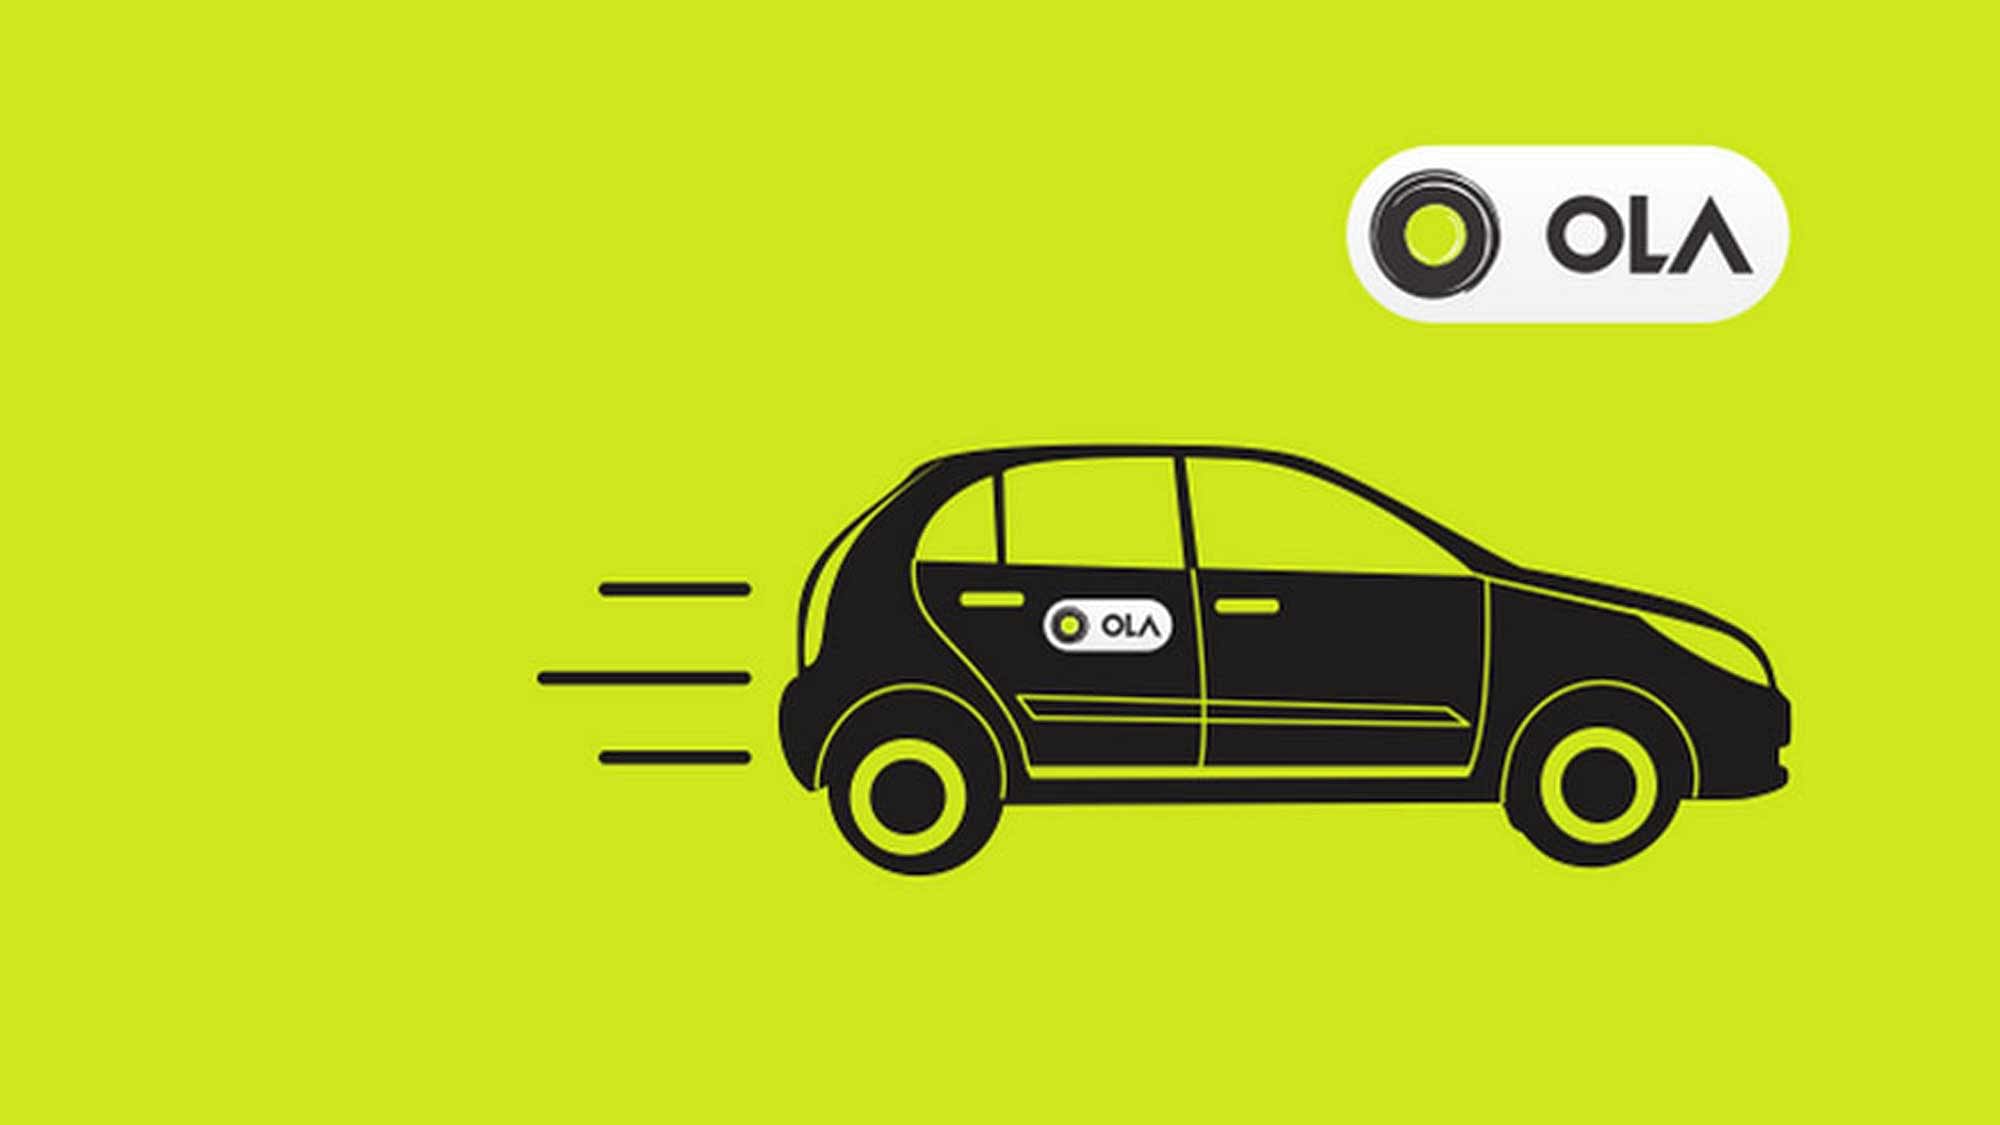 Publicity image of Ola cabs. (Photo: Twitter/@OlaCabs)